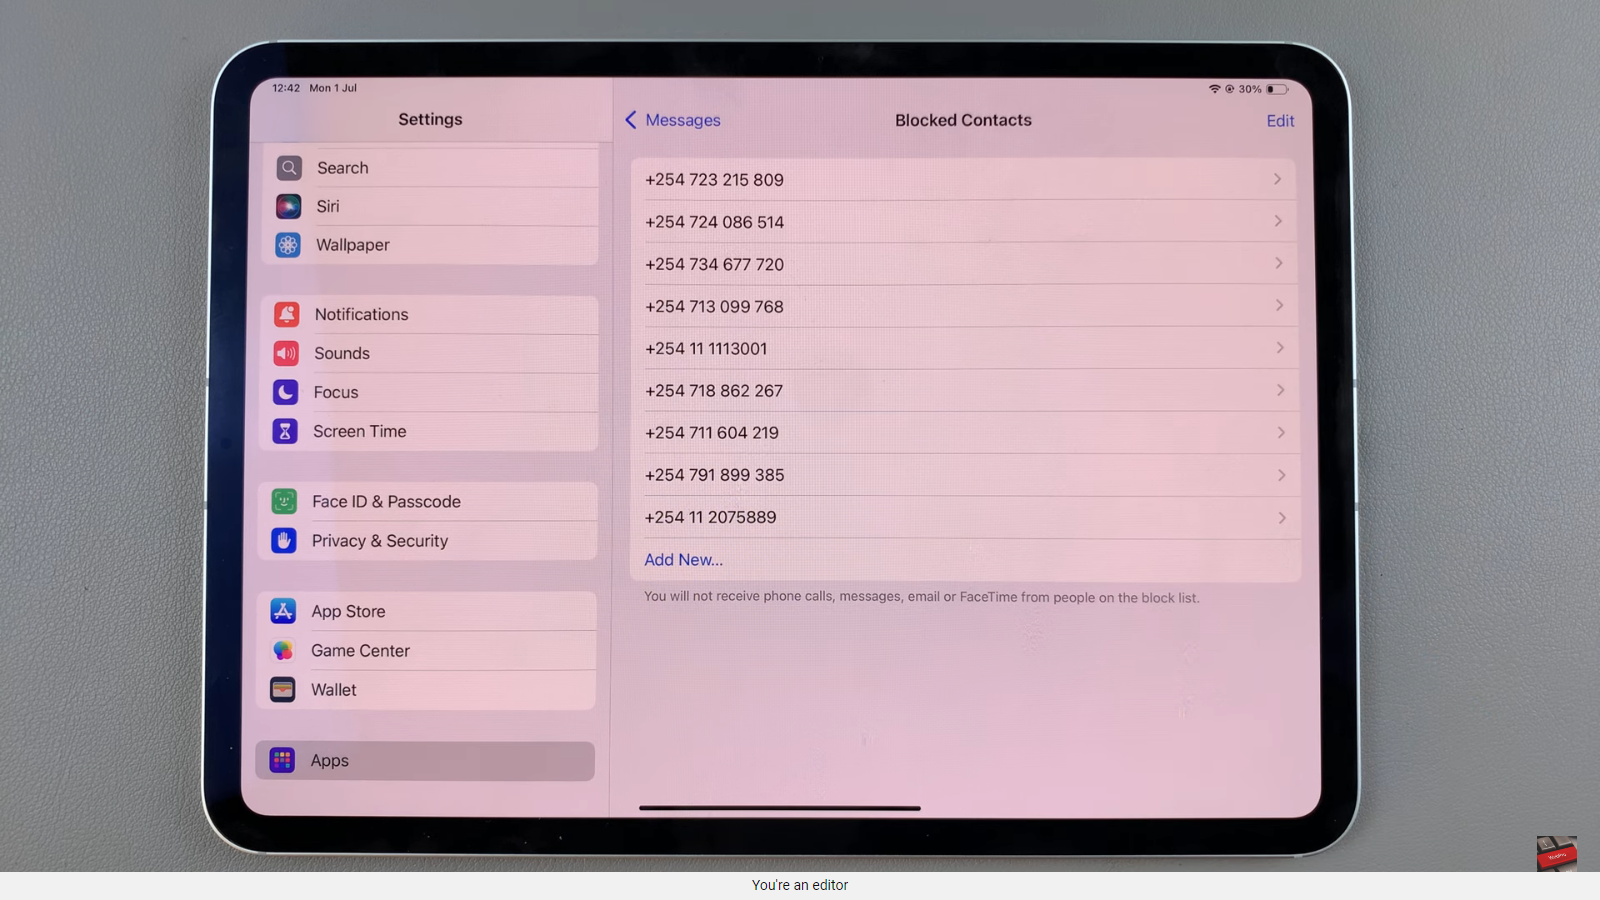 How To See ALL Blocked Contacts On iPad